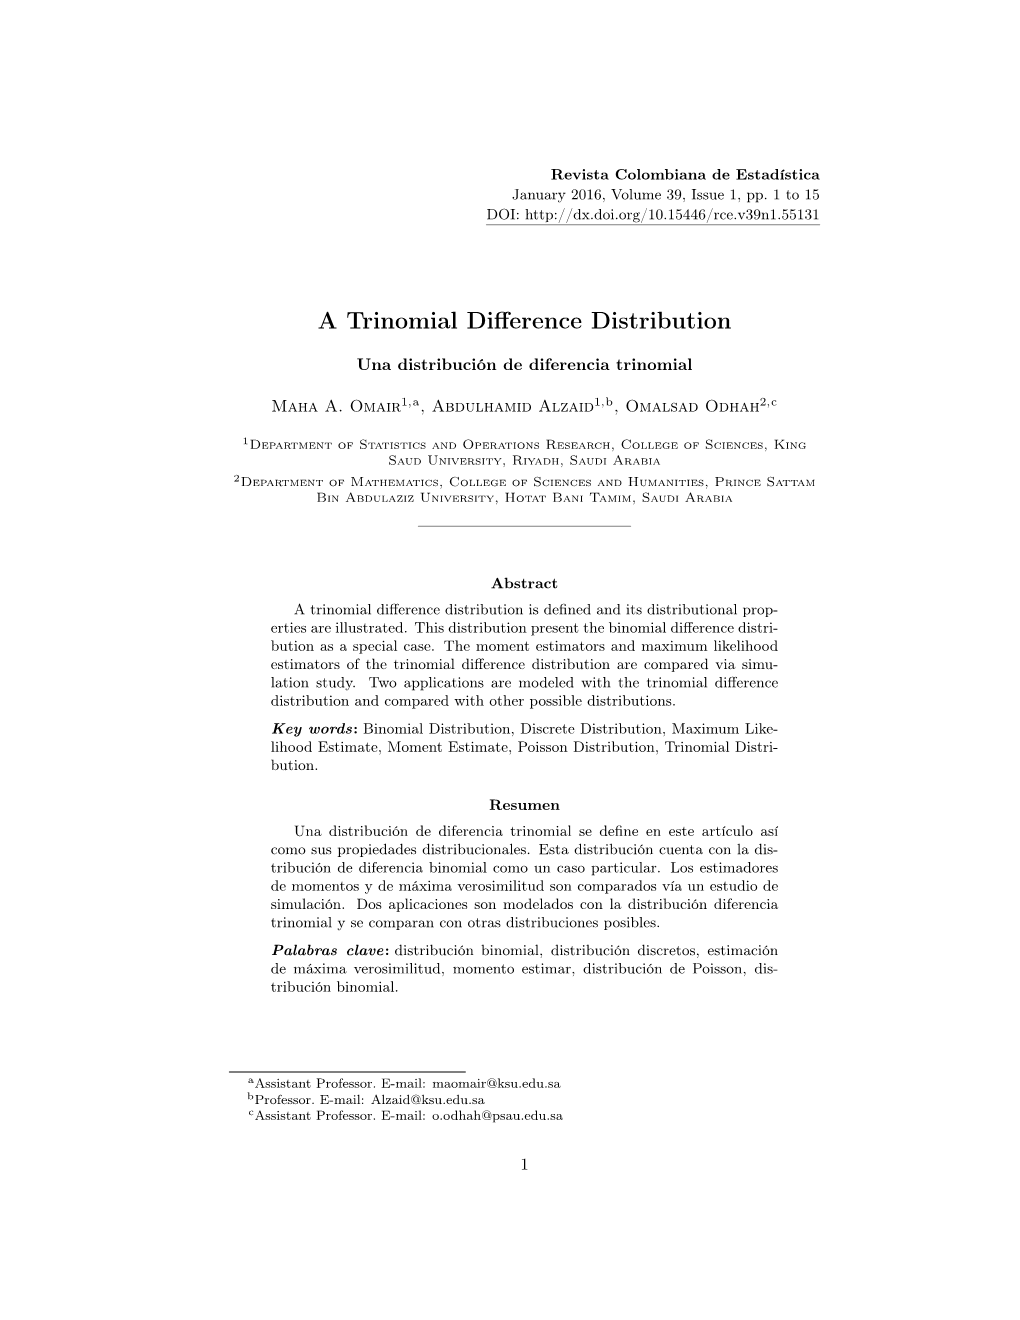 A Trinomial Difference Distribution